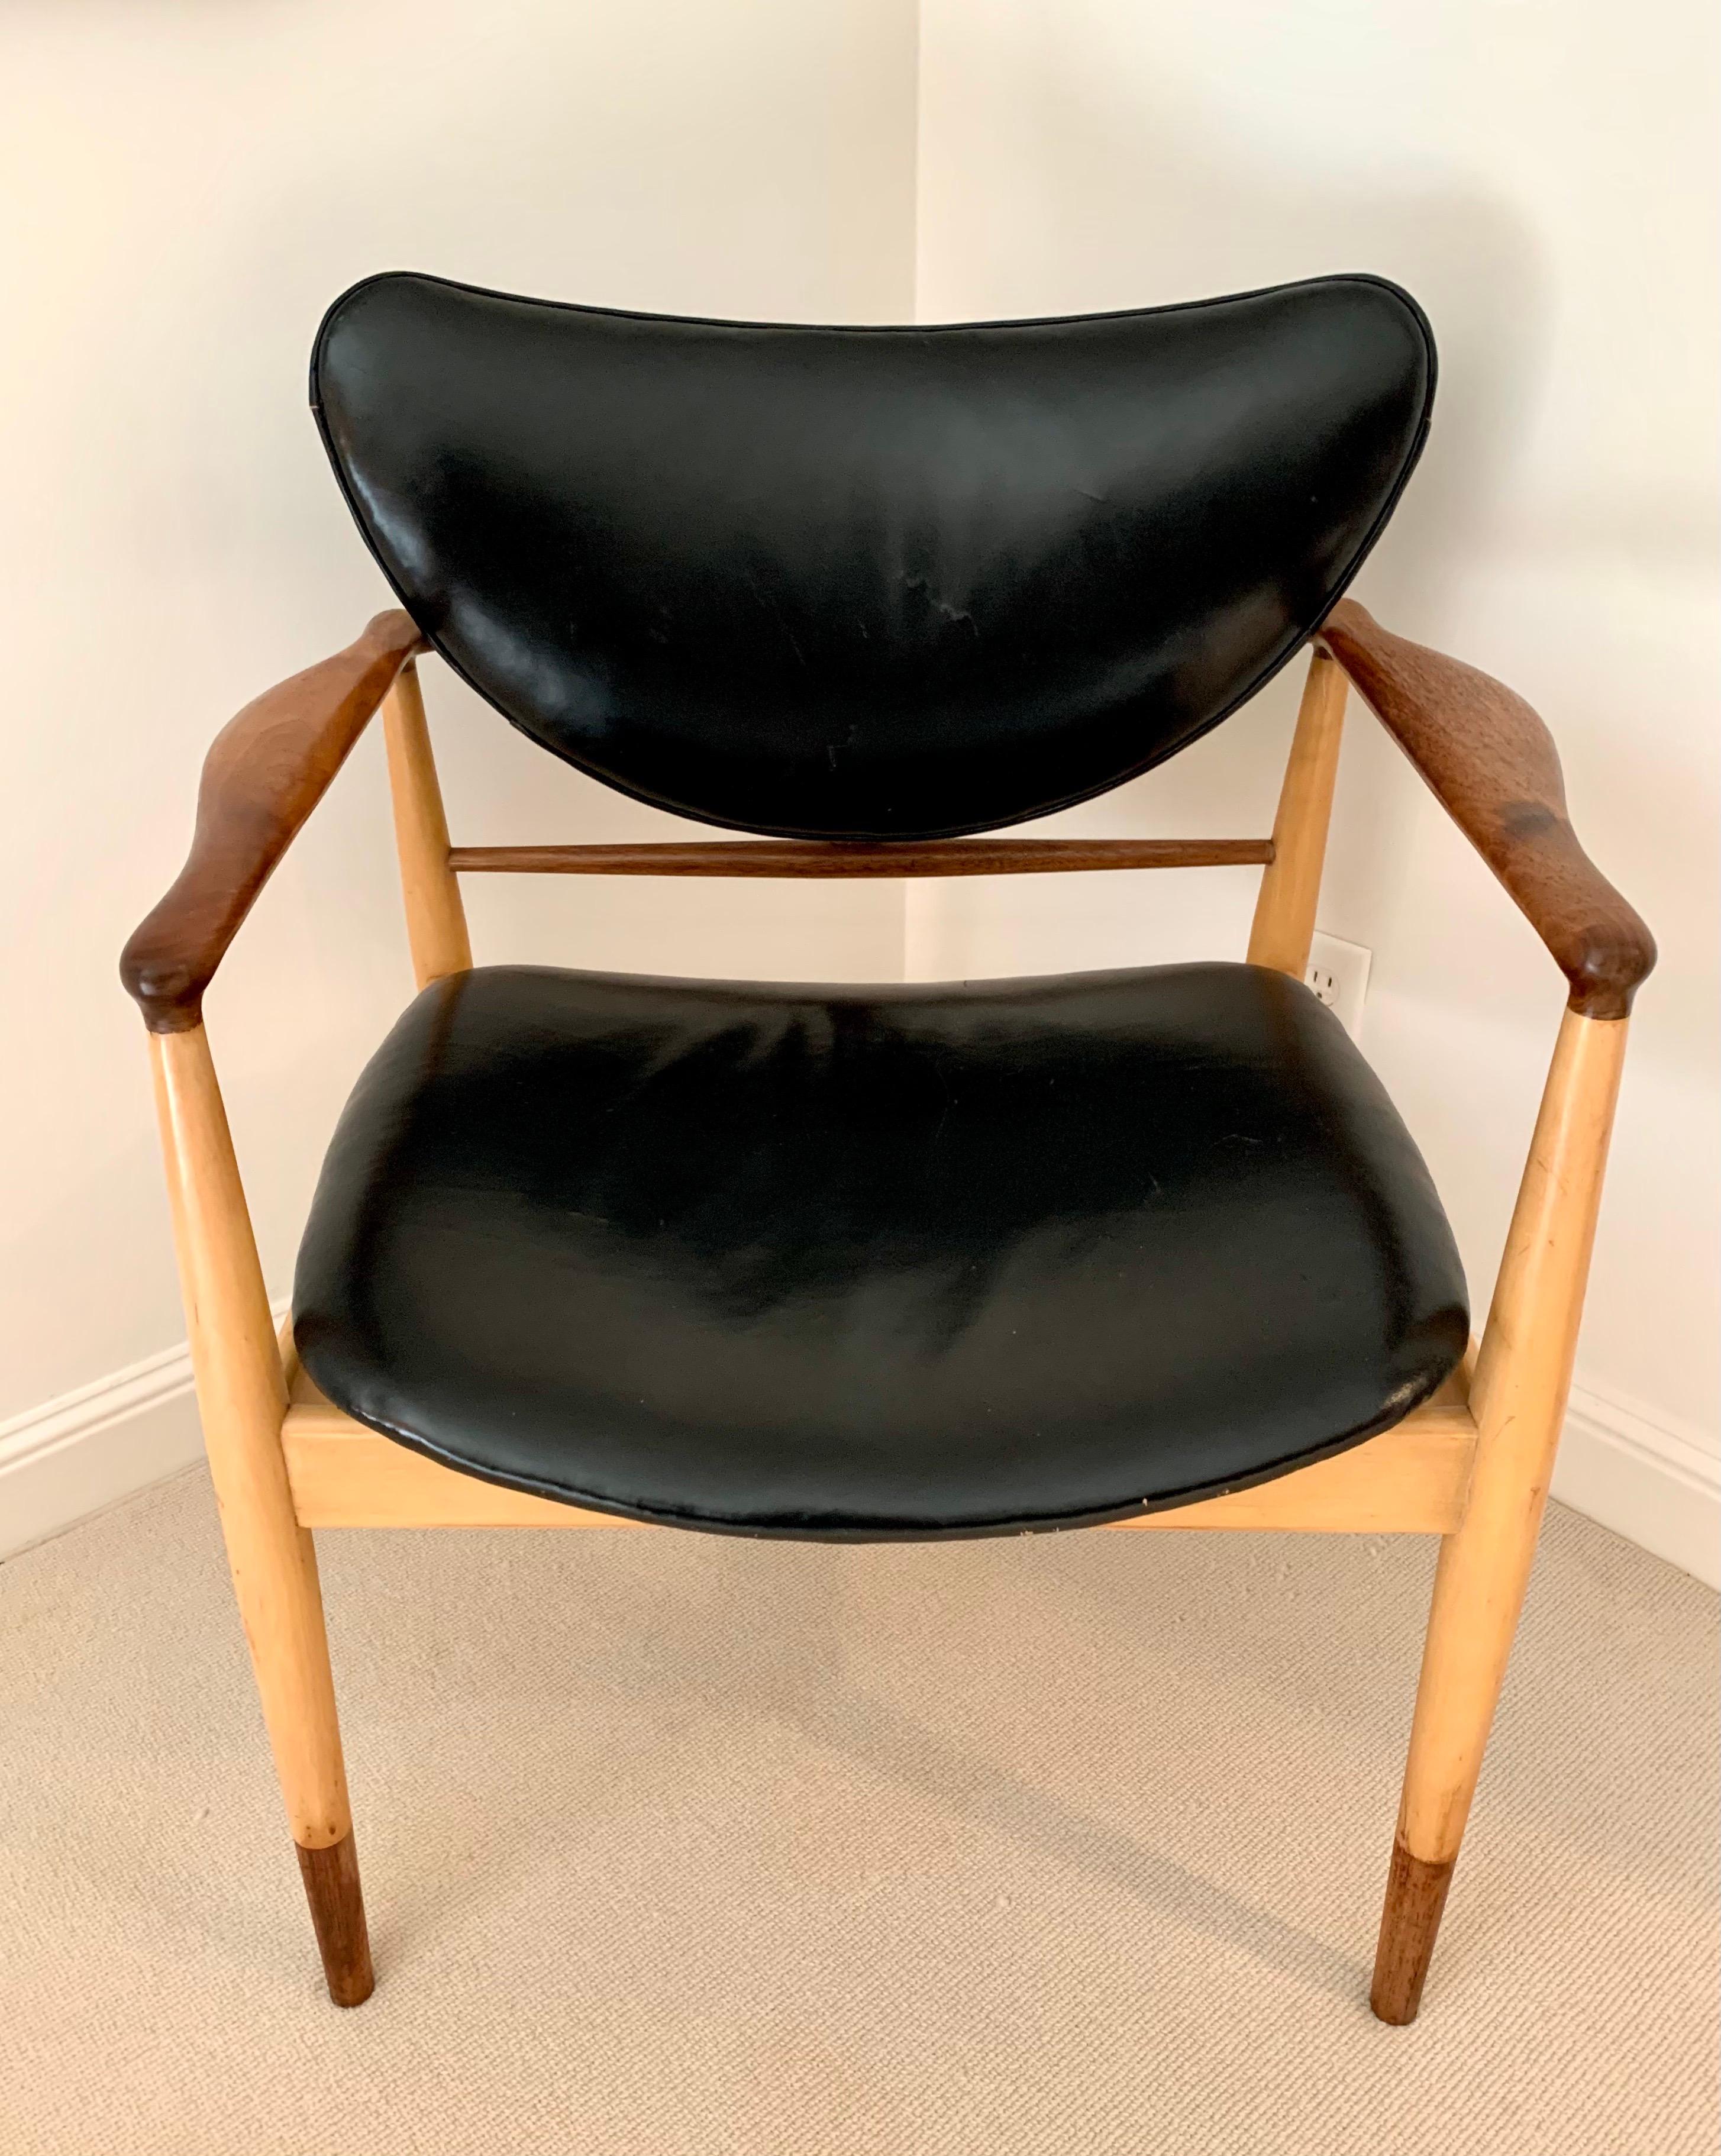 Ultra rare Finn Juhl #48 chair features a maple and walnut two-tone frame with black leather upholstery. It is both elegant and comfortable. Perfect in a dining room or conference room See our other listing for matching chair.